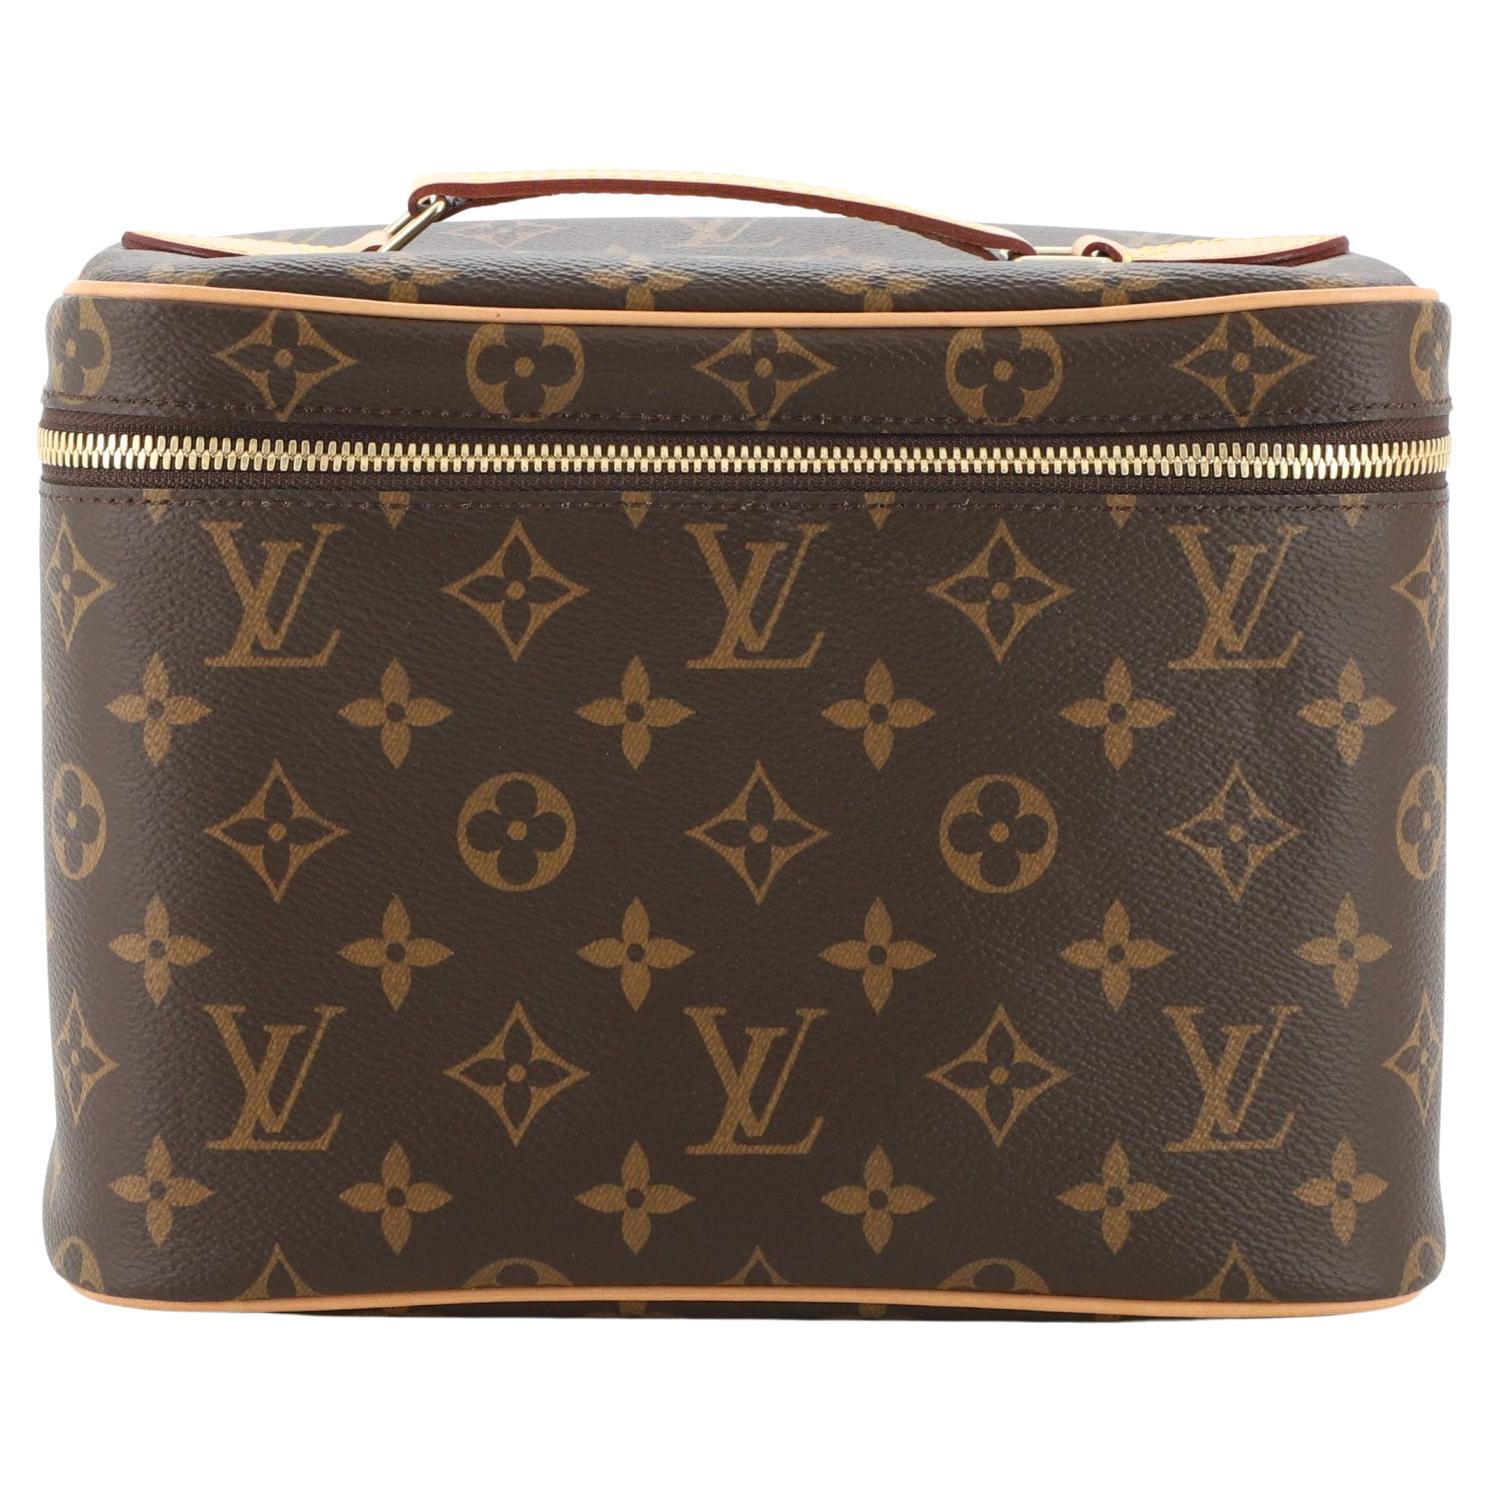 Louis Vuitton Nice Bb - For Sale on 1stDibs  louis vuitton lunch bag,  louis vuitton lunch box, lv nice bb